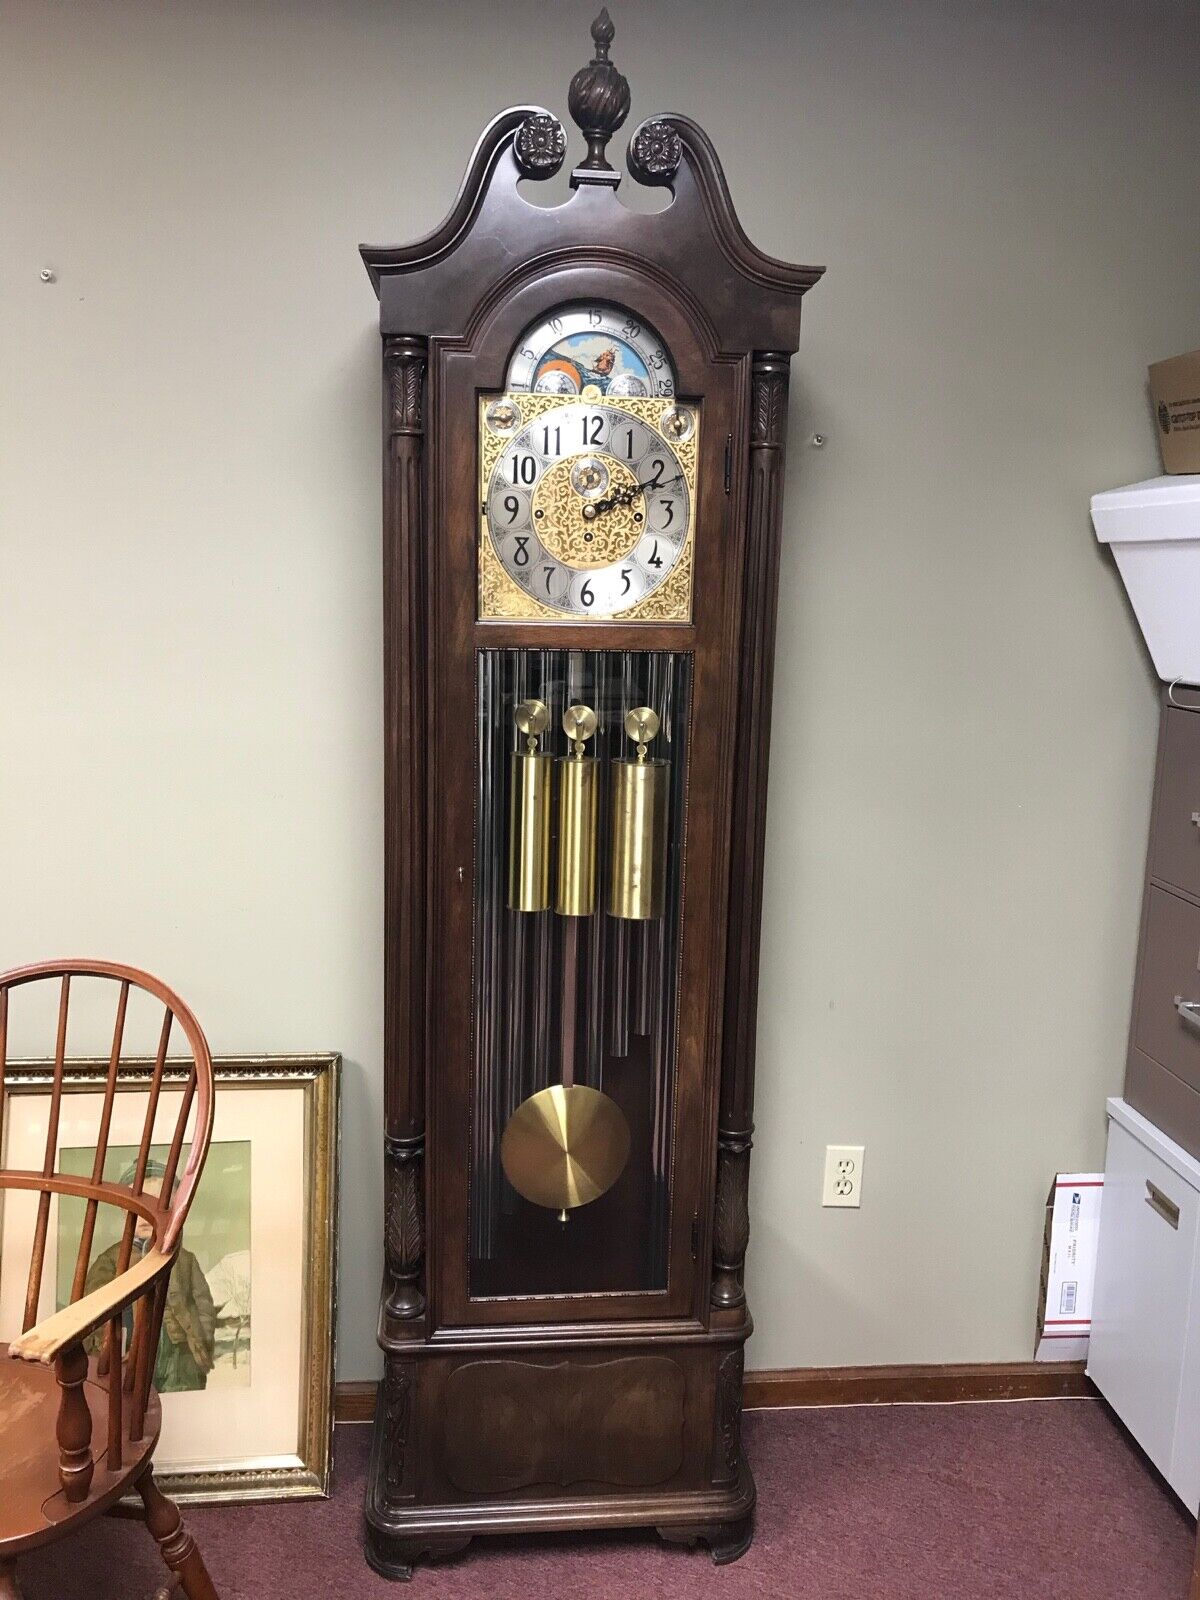 Herschede Grand Father Clock 9 Tube